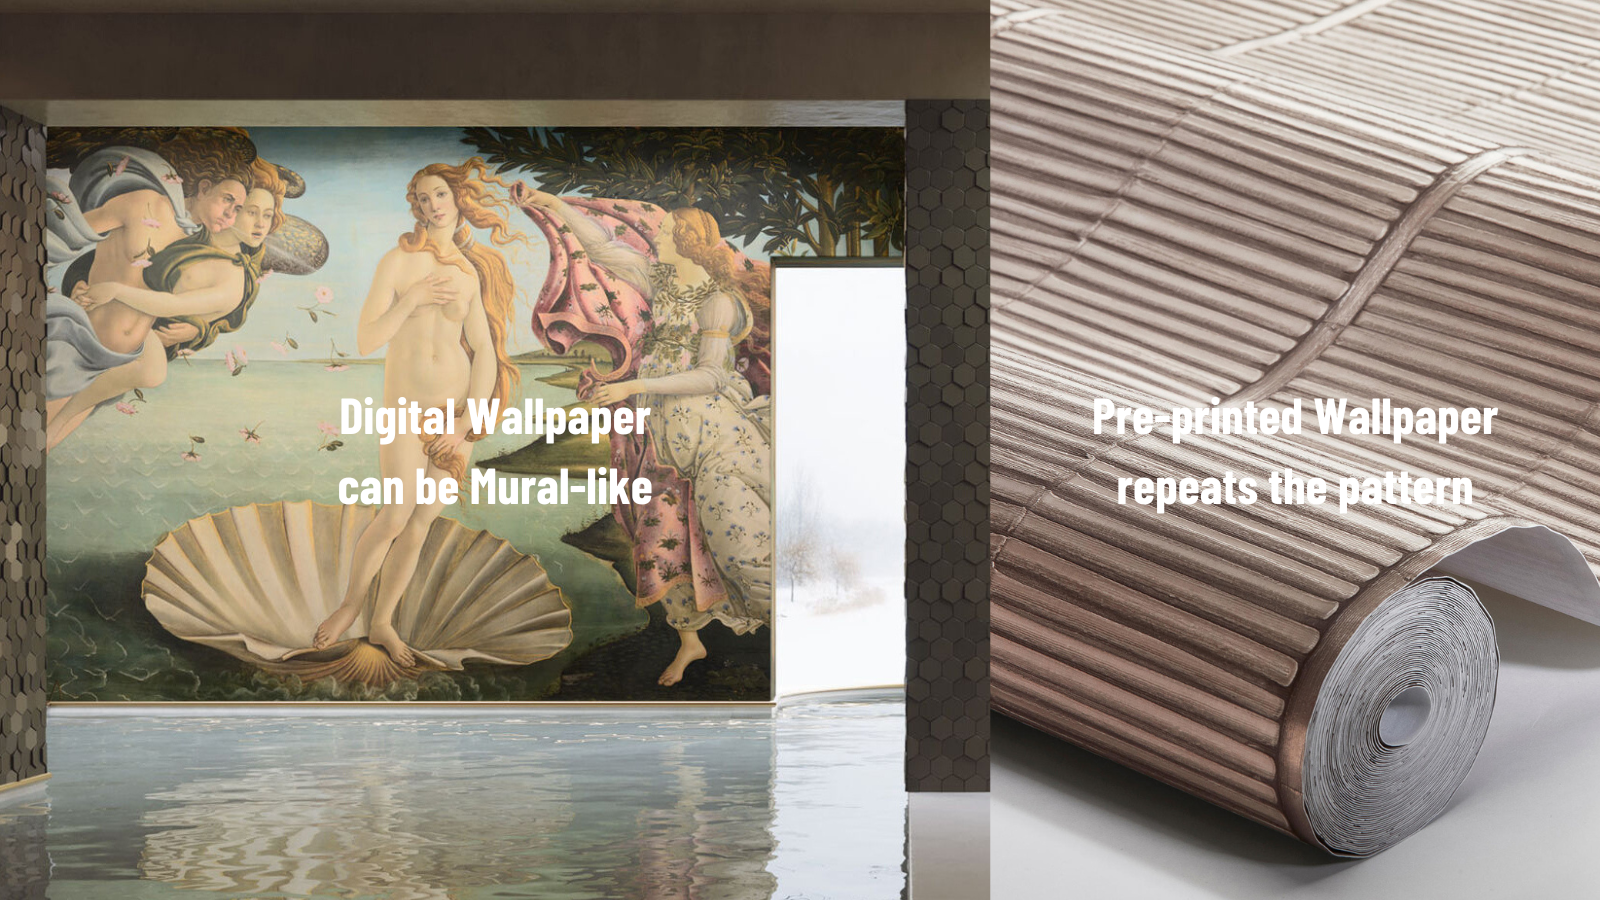 Digital Wallpaper 101: A Primer on What You Can Expect